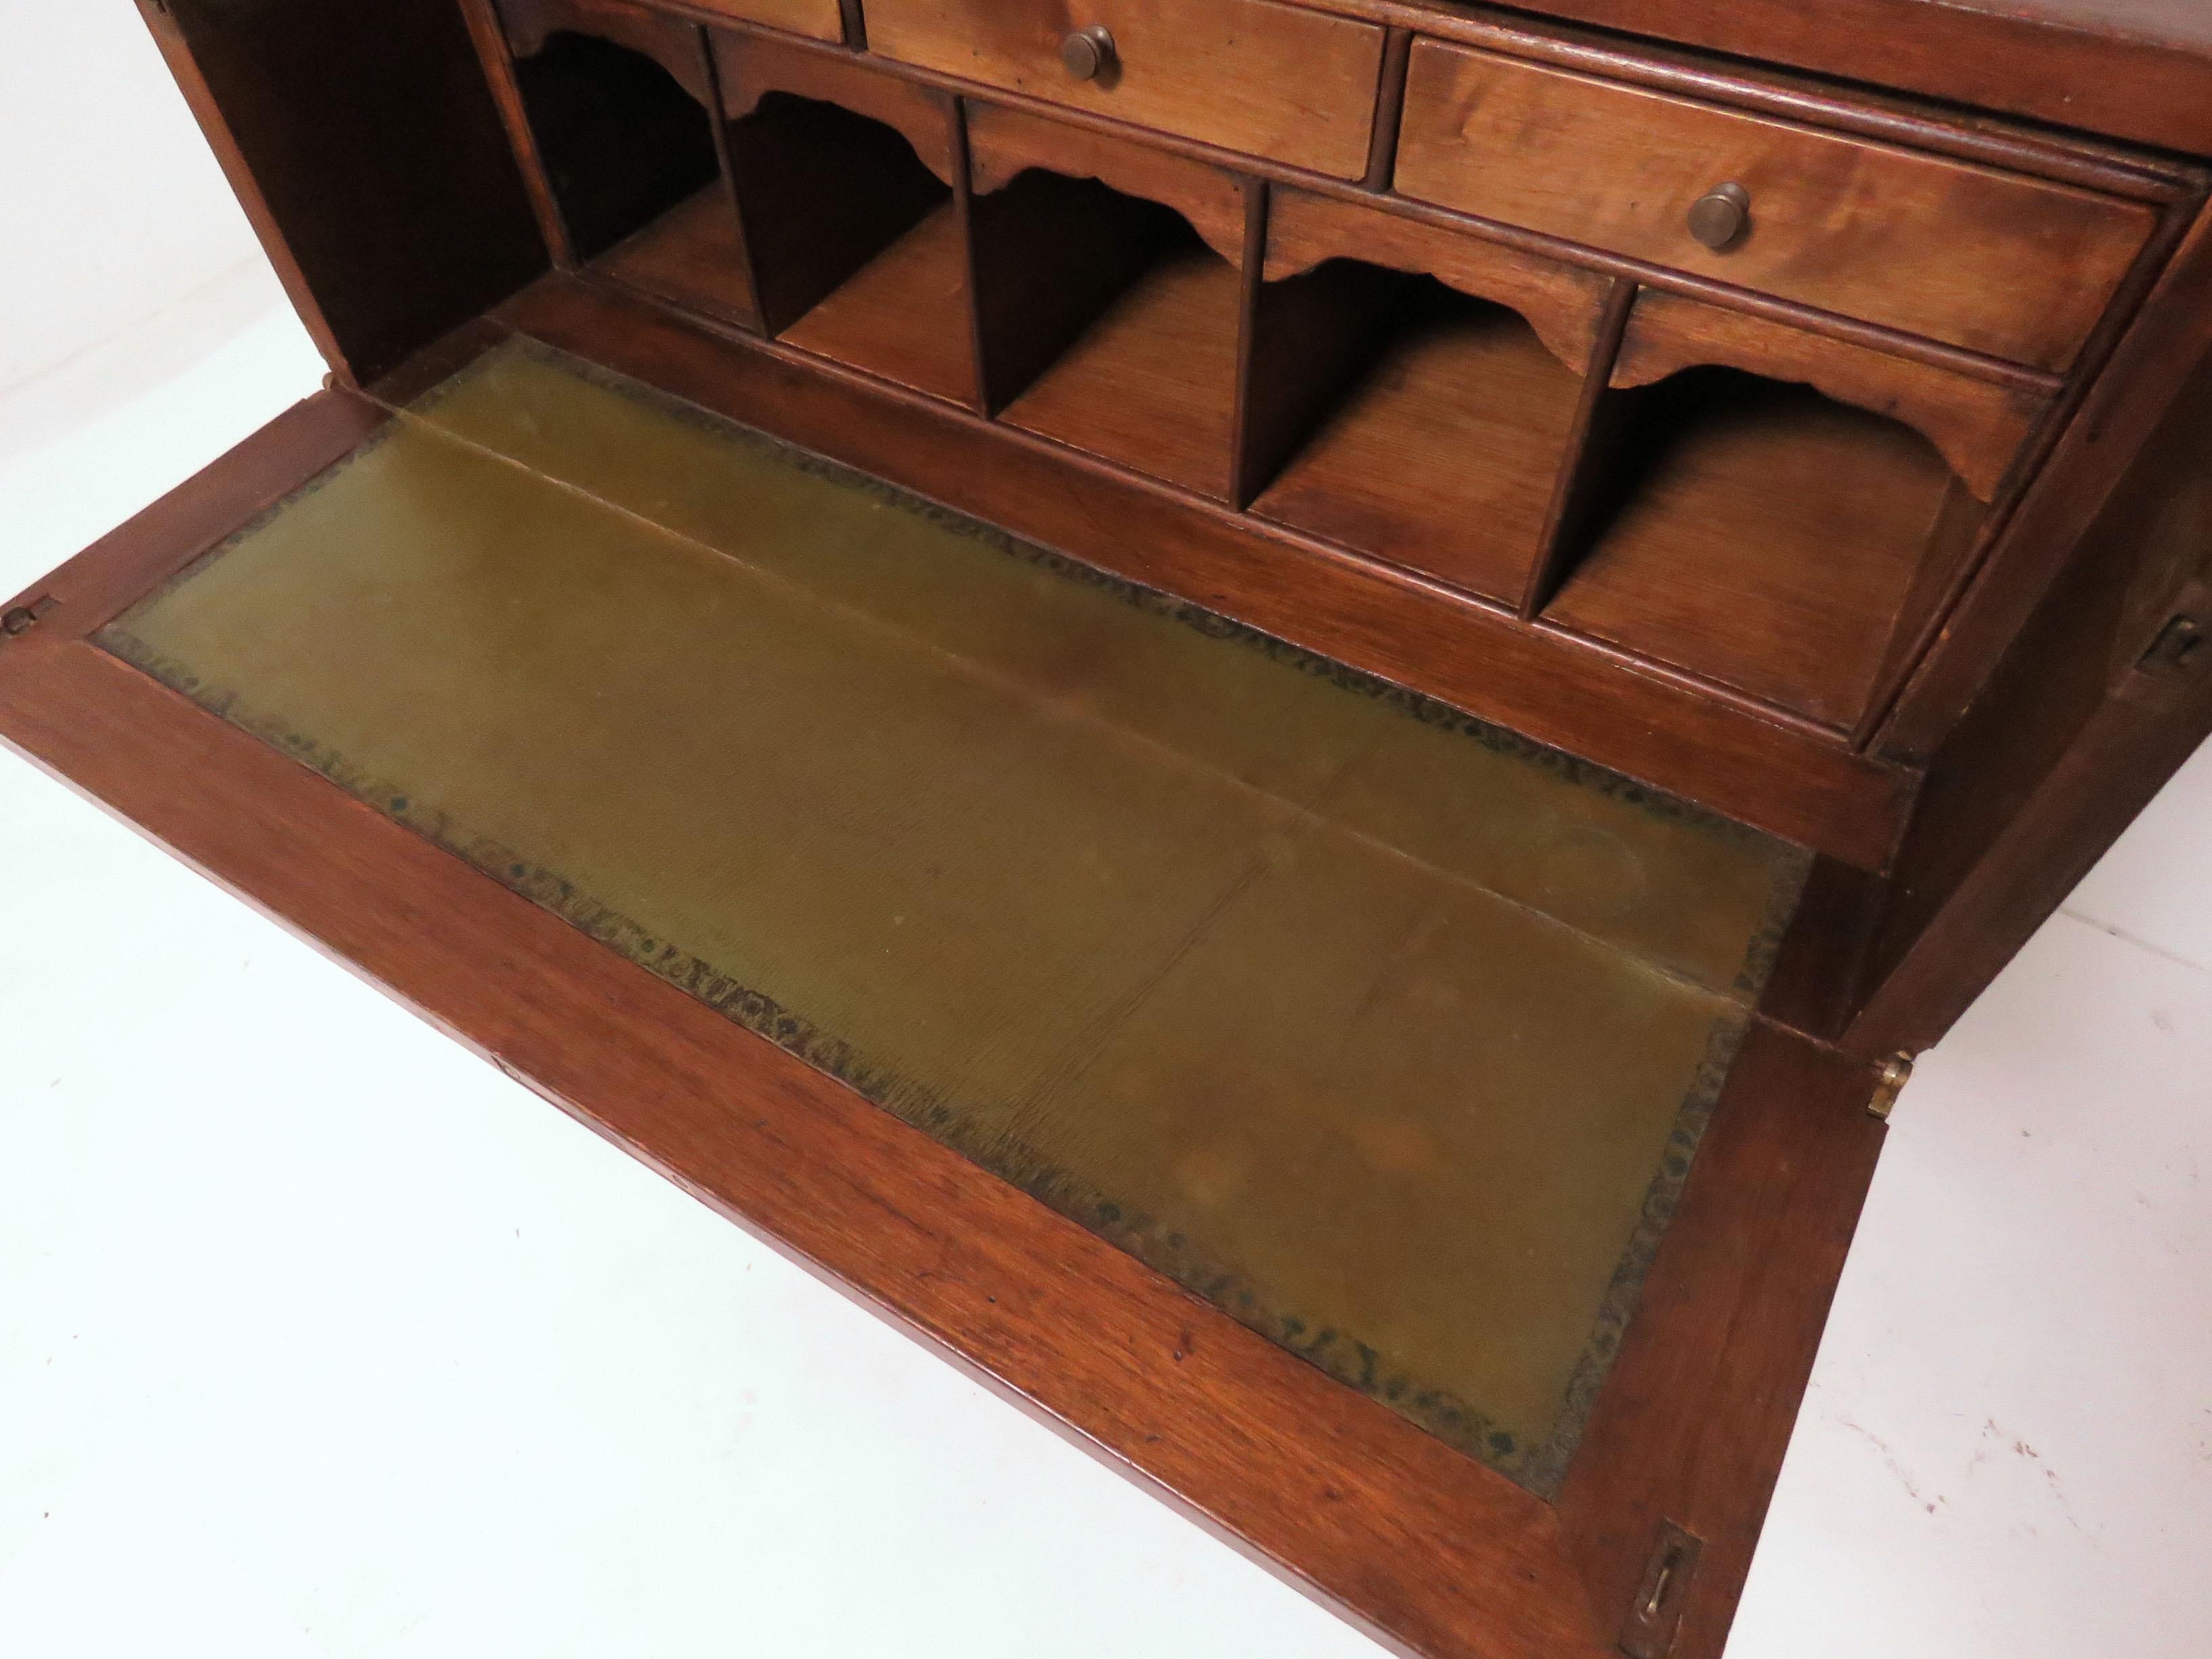 Brass Antique Mahogany Campaign Chest with Desk Drawer, circa 1890s